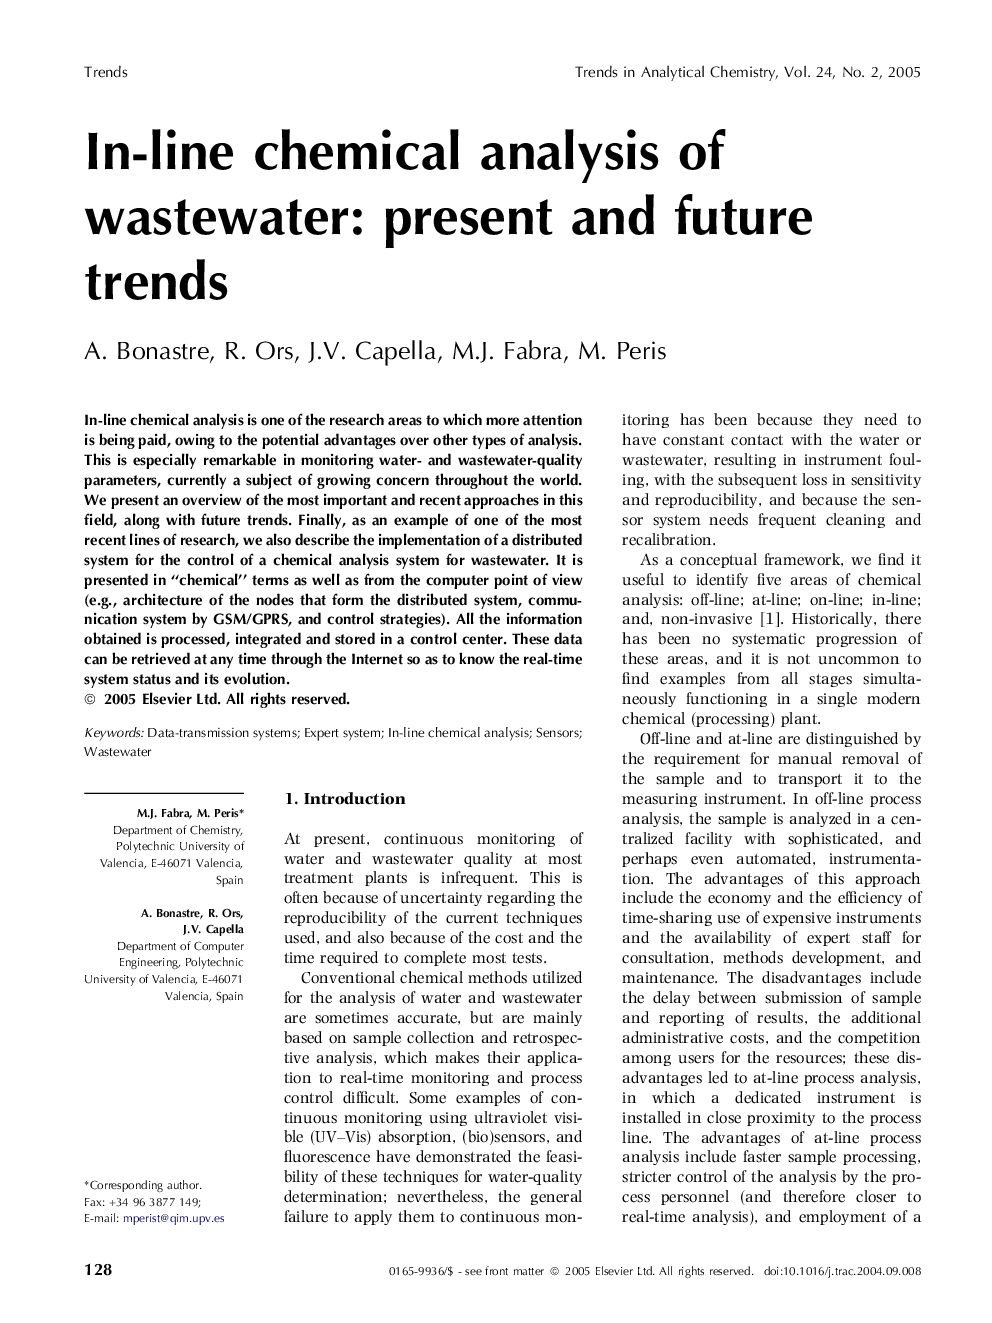 In-line chemical analysis of wastewater: present and future trends